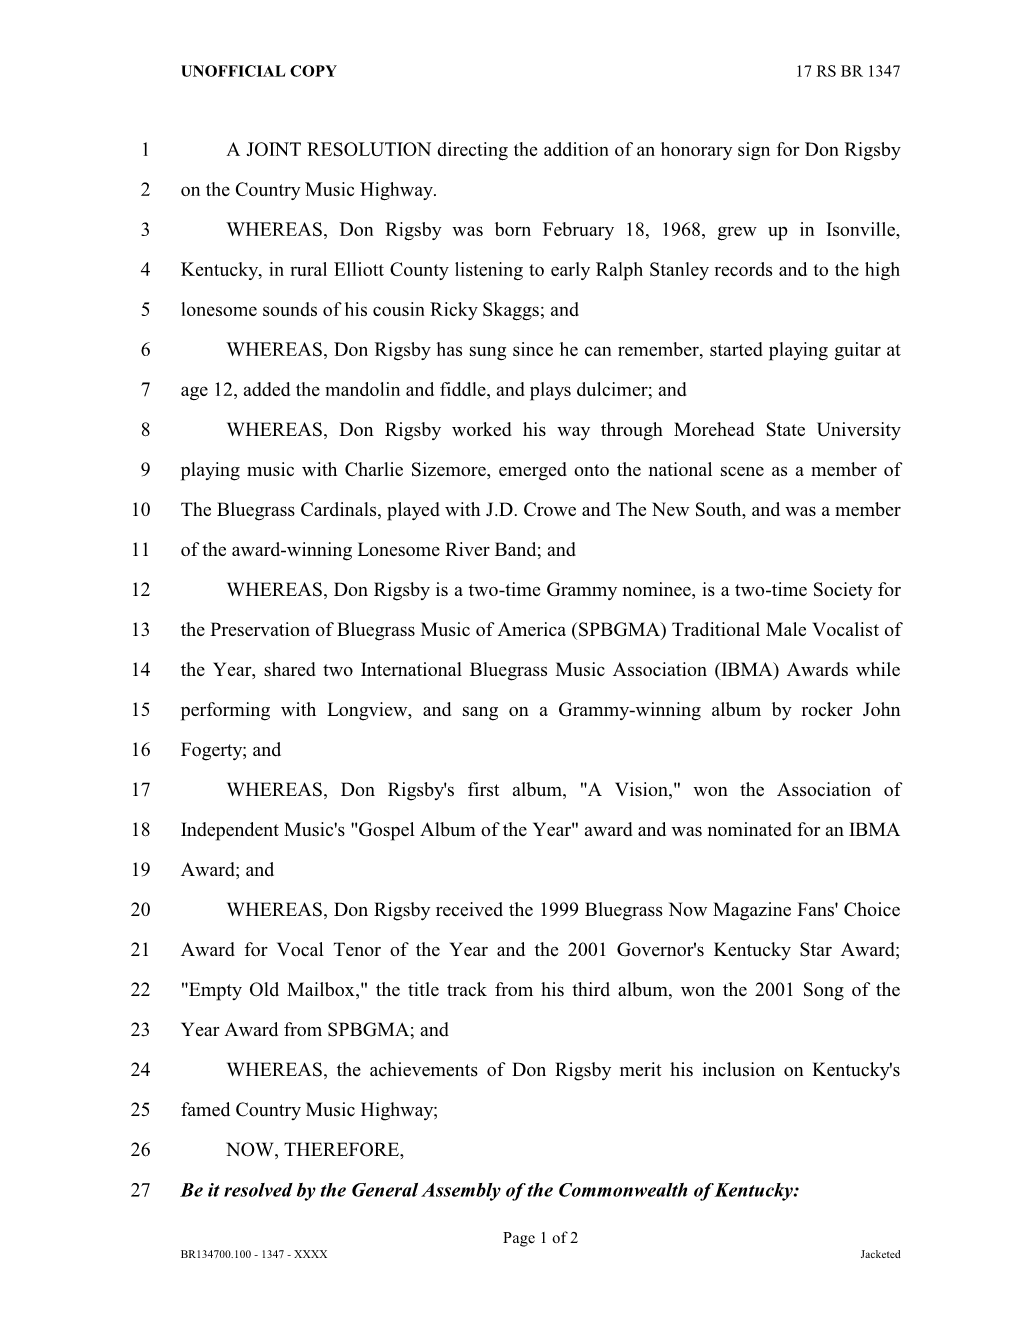 A JOINT RESOLUTION Directing the Addition of an Honorary Sign for Don Rigsby 2 on the Country Music Highway